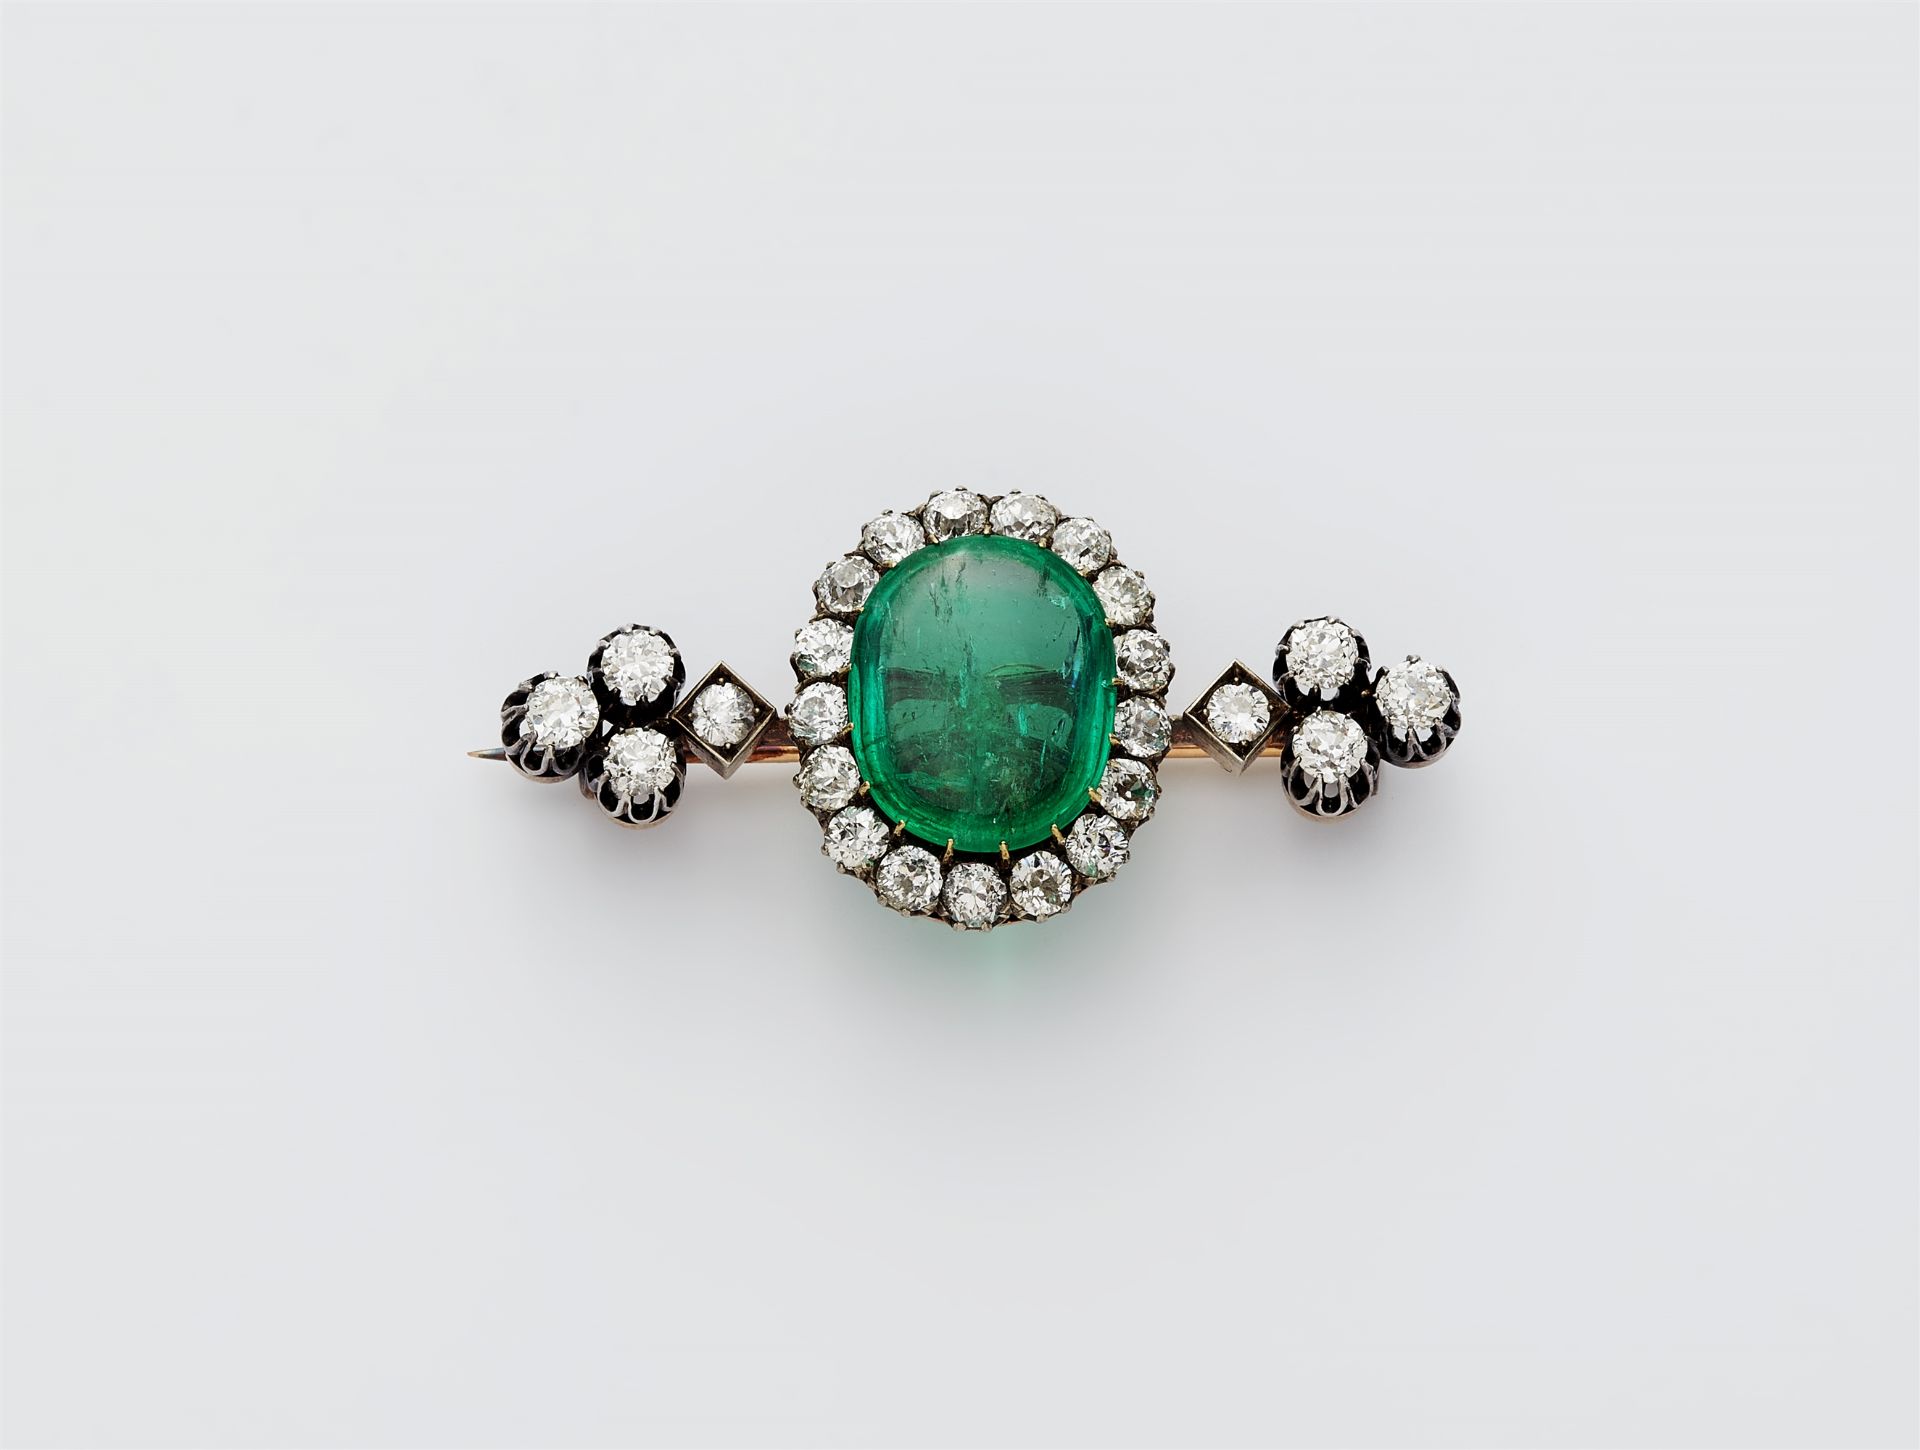 A late 19th century 14k gold and diamond pin brooch with a detachable fine emerald.